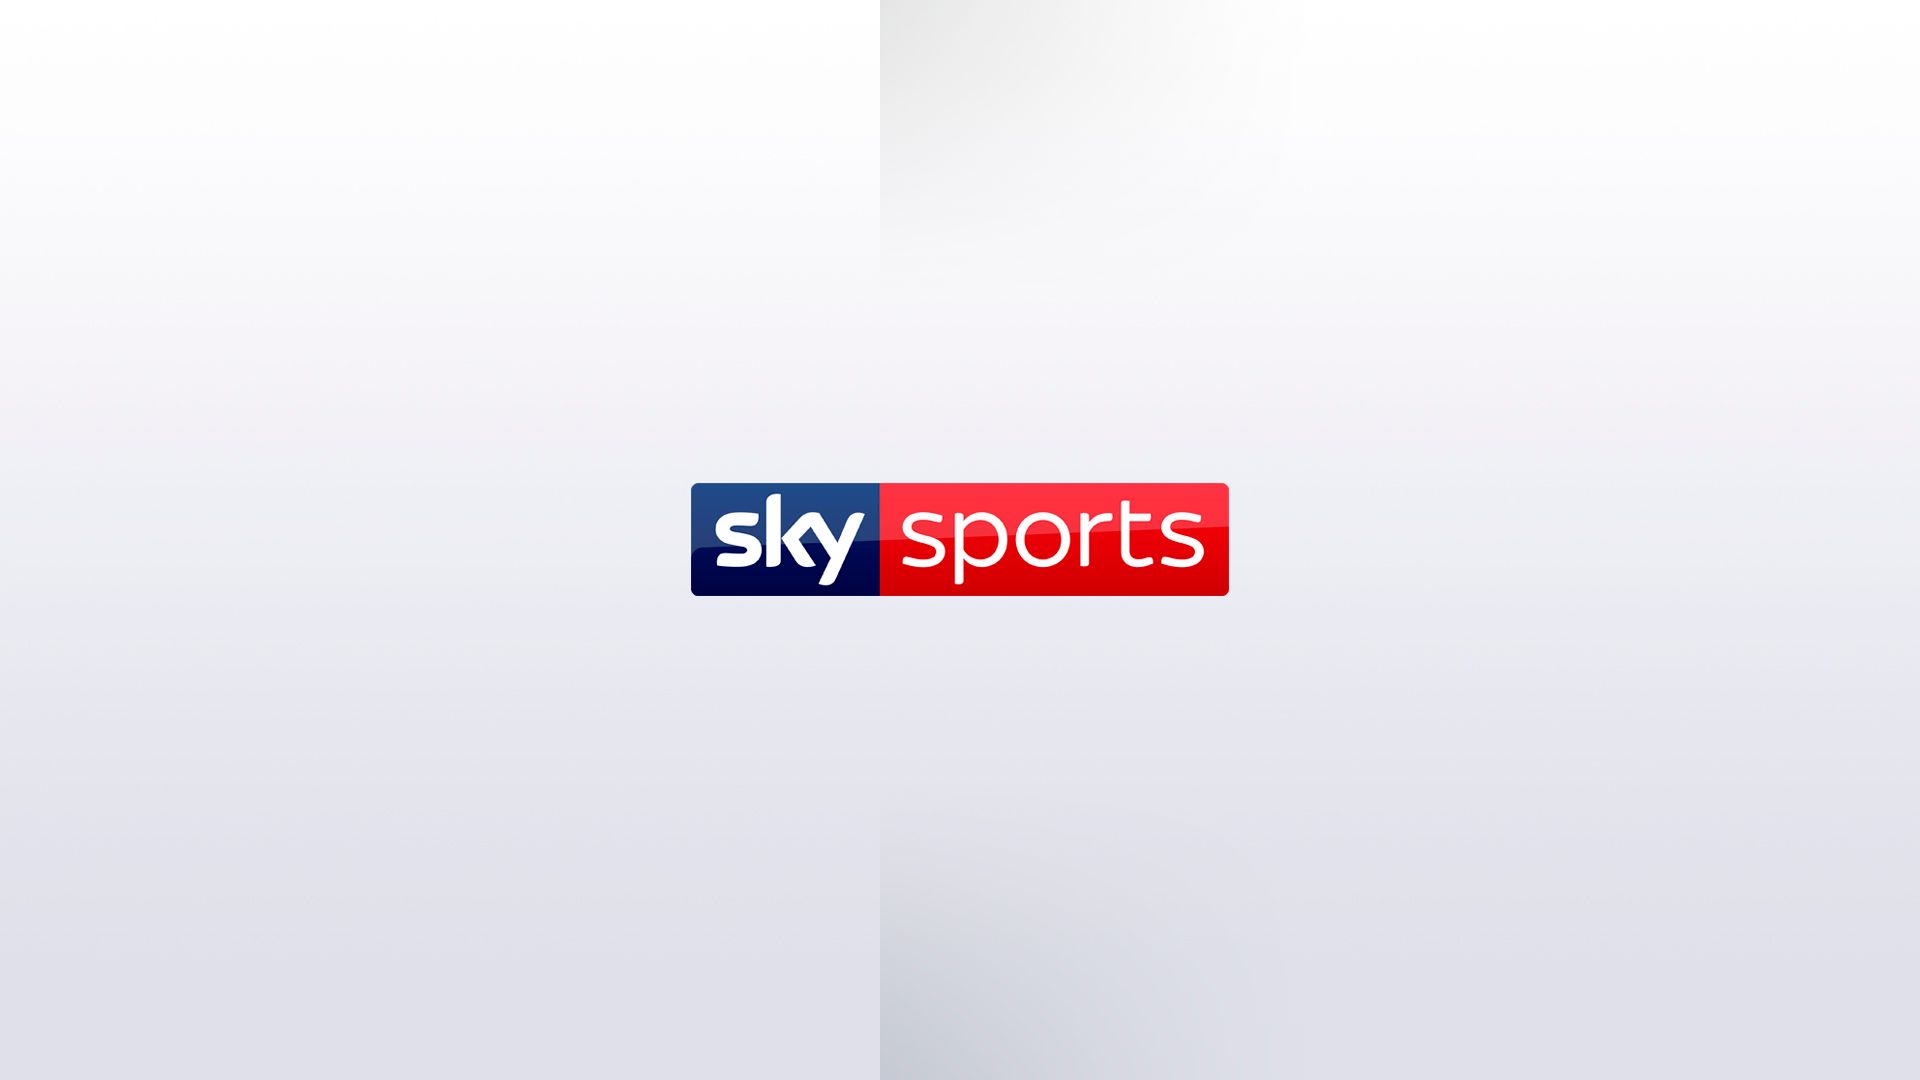 Sky Sports wins Sports Content Organisation of the Year at SJA awards